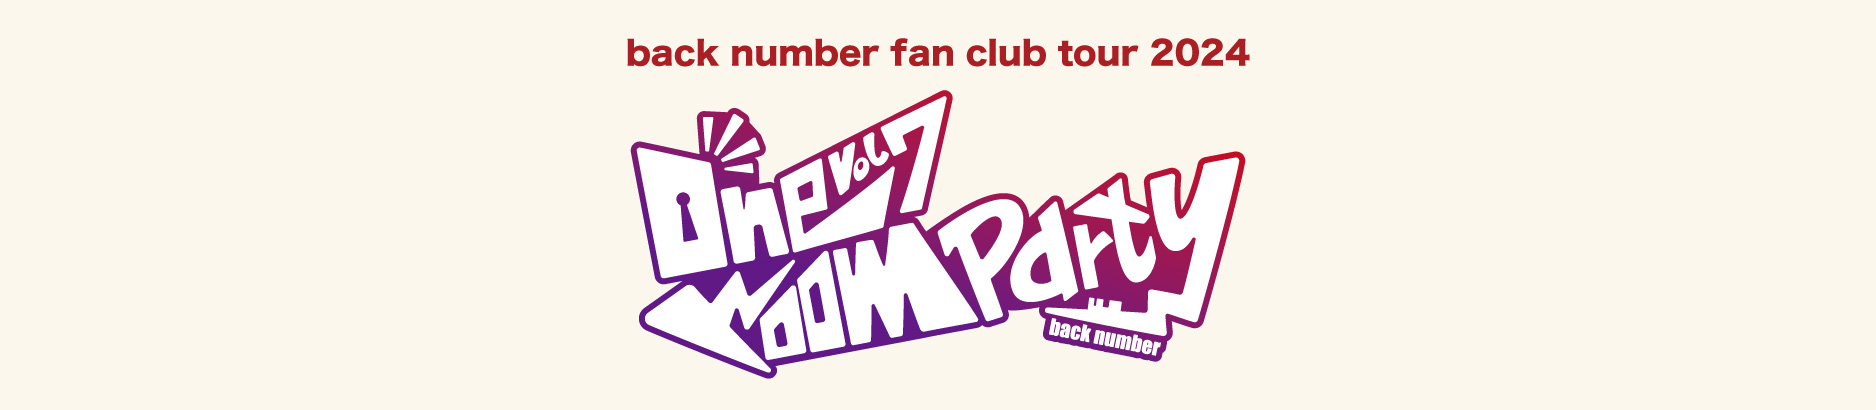 back number fan club tour 2024『one room party vol.7』FC二次受付終了(9/29更新)